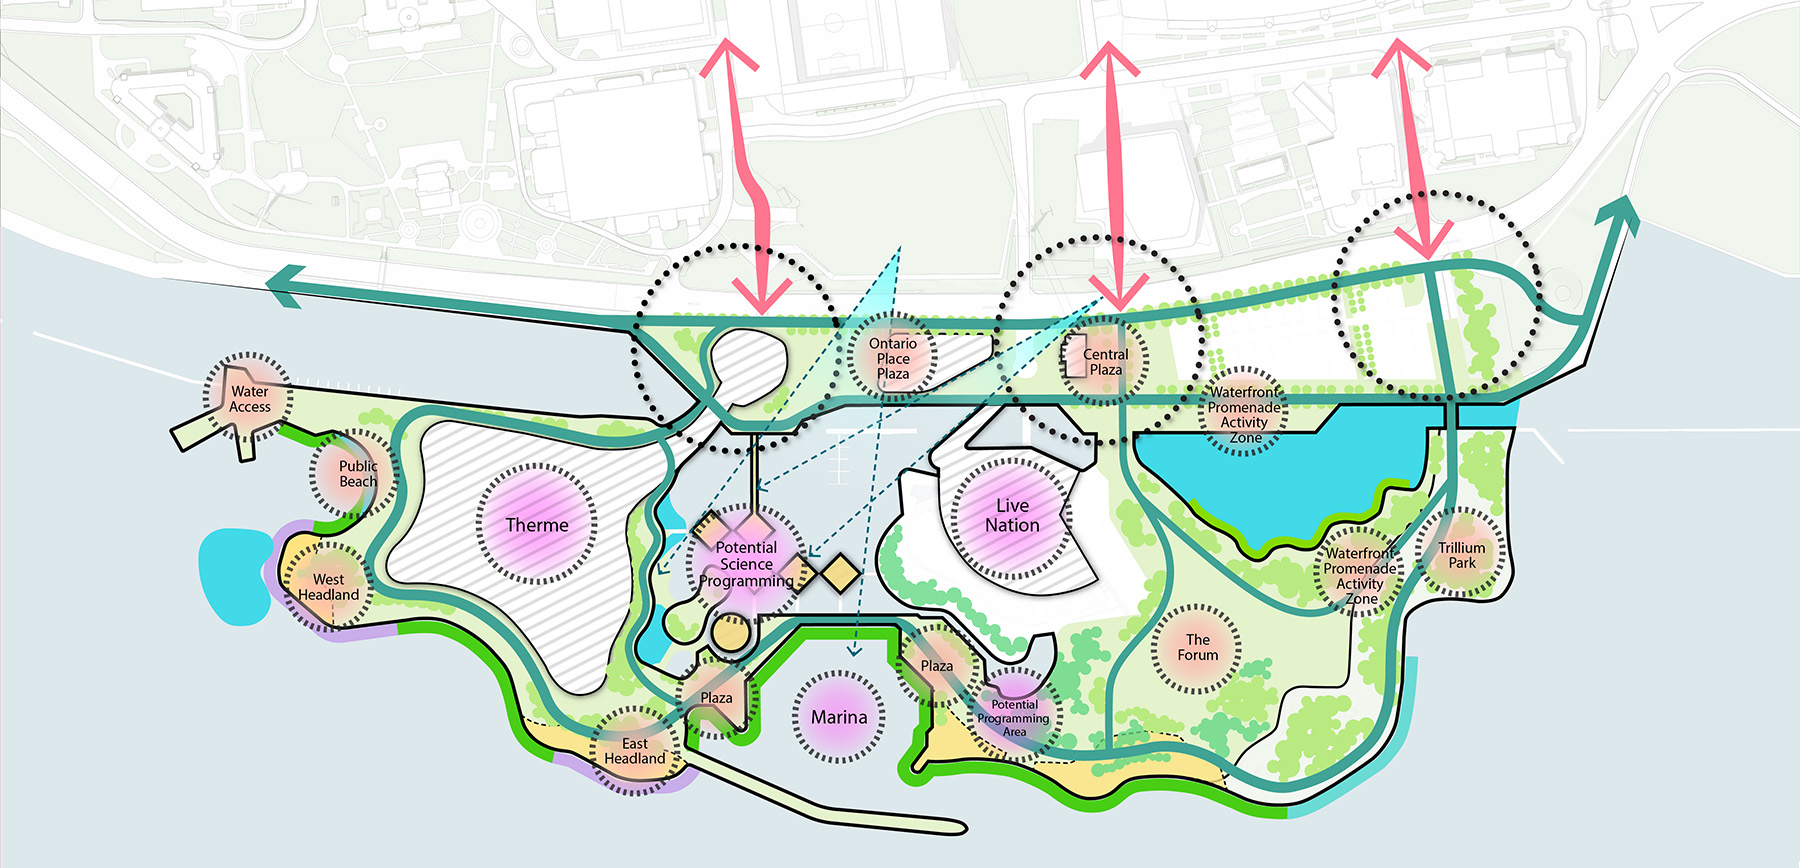 Map of Ontario Place showing the framework plan including pathways, connections, greenspace, views, and planting. Key elements such as water access, plazas and activity zones are also labeled. 